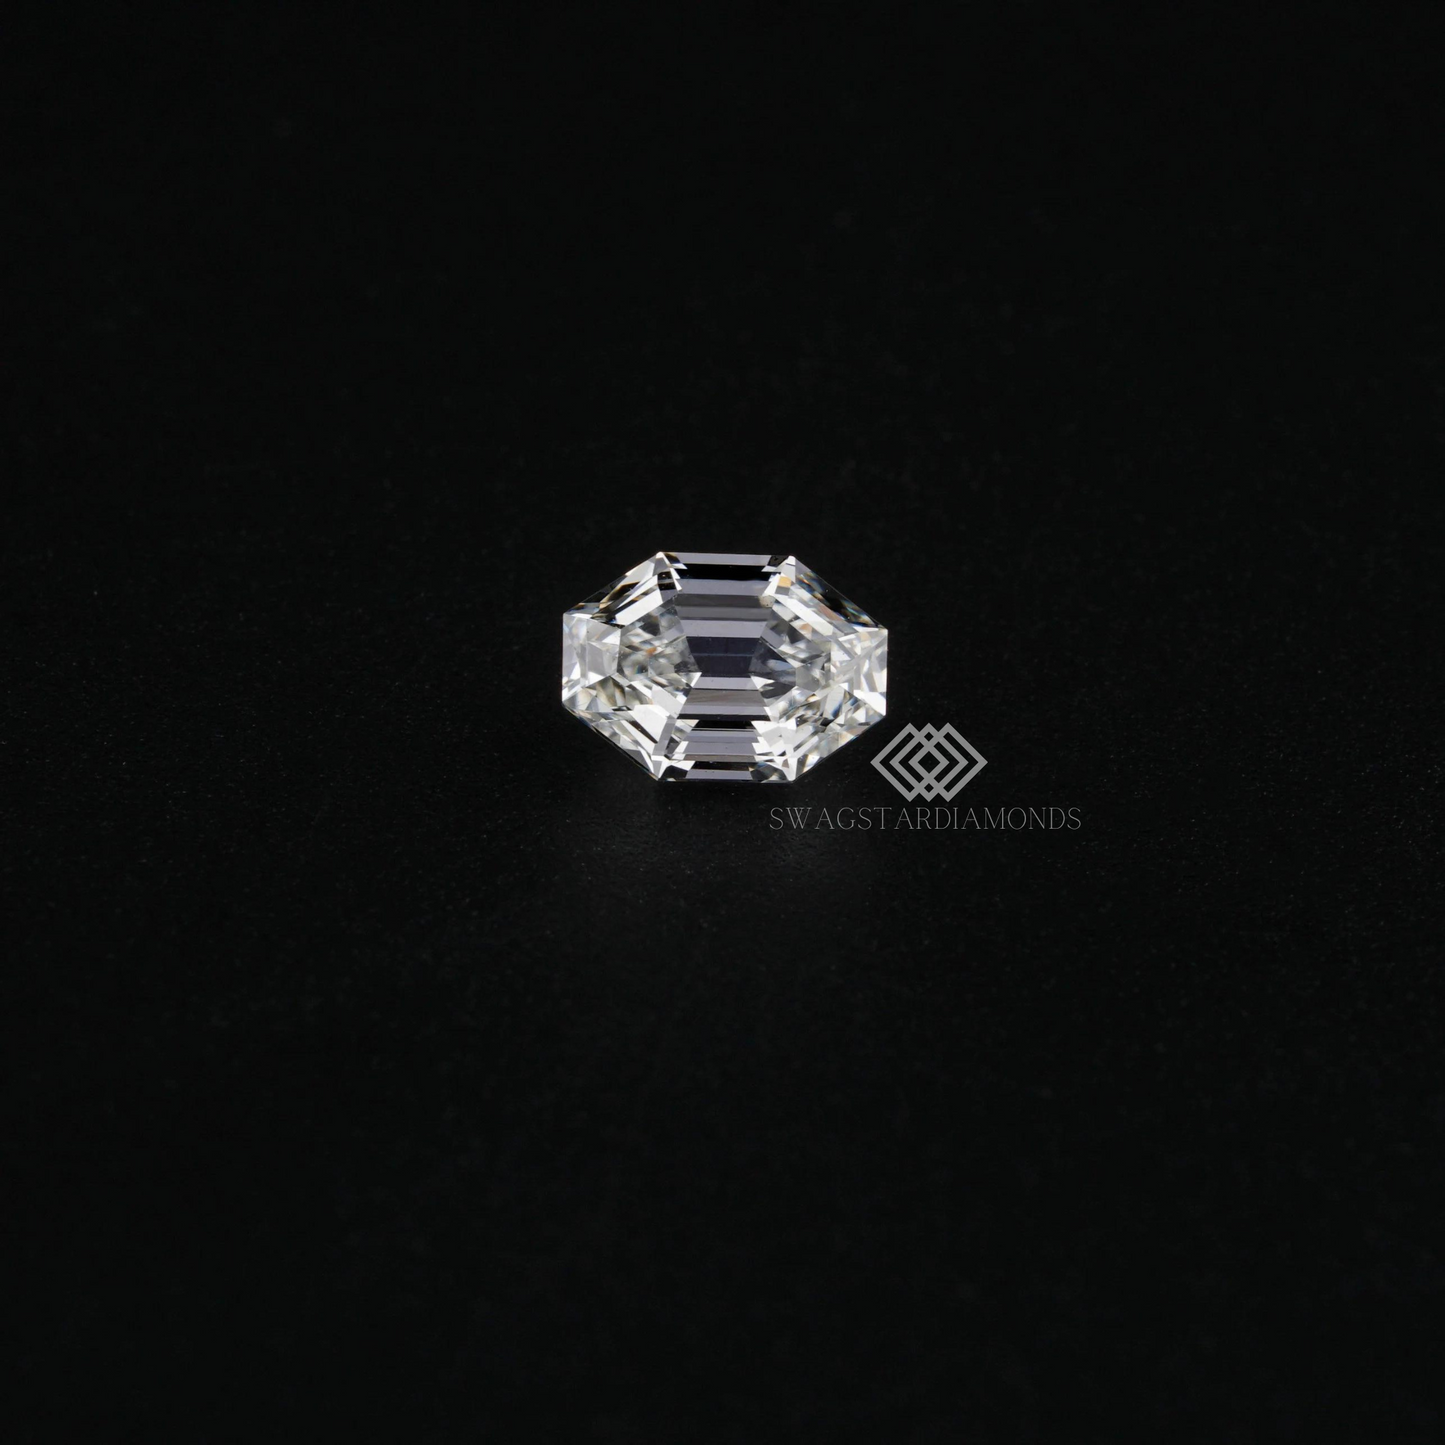 Octagon Shape Diamond With Lab-Grown & Natural Diamonds, Jewelry By Leading Manufacturer From Swagstar, Surat. Explore Wedding, Engagement, Eternity Rings, Earring & Studs, Bracelets In 10k, 14k, & 18k Gold Varieties, Including White, Yellow, Rose Gold.